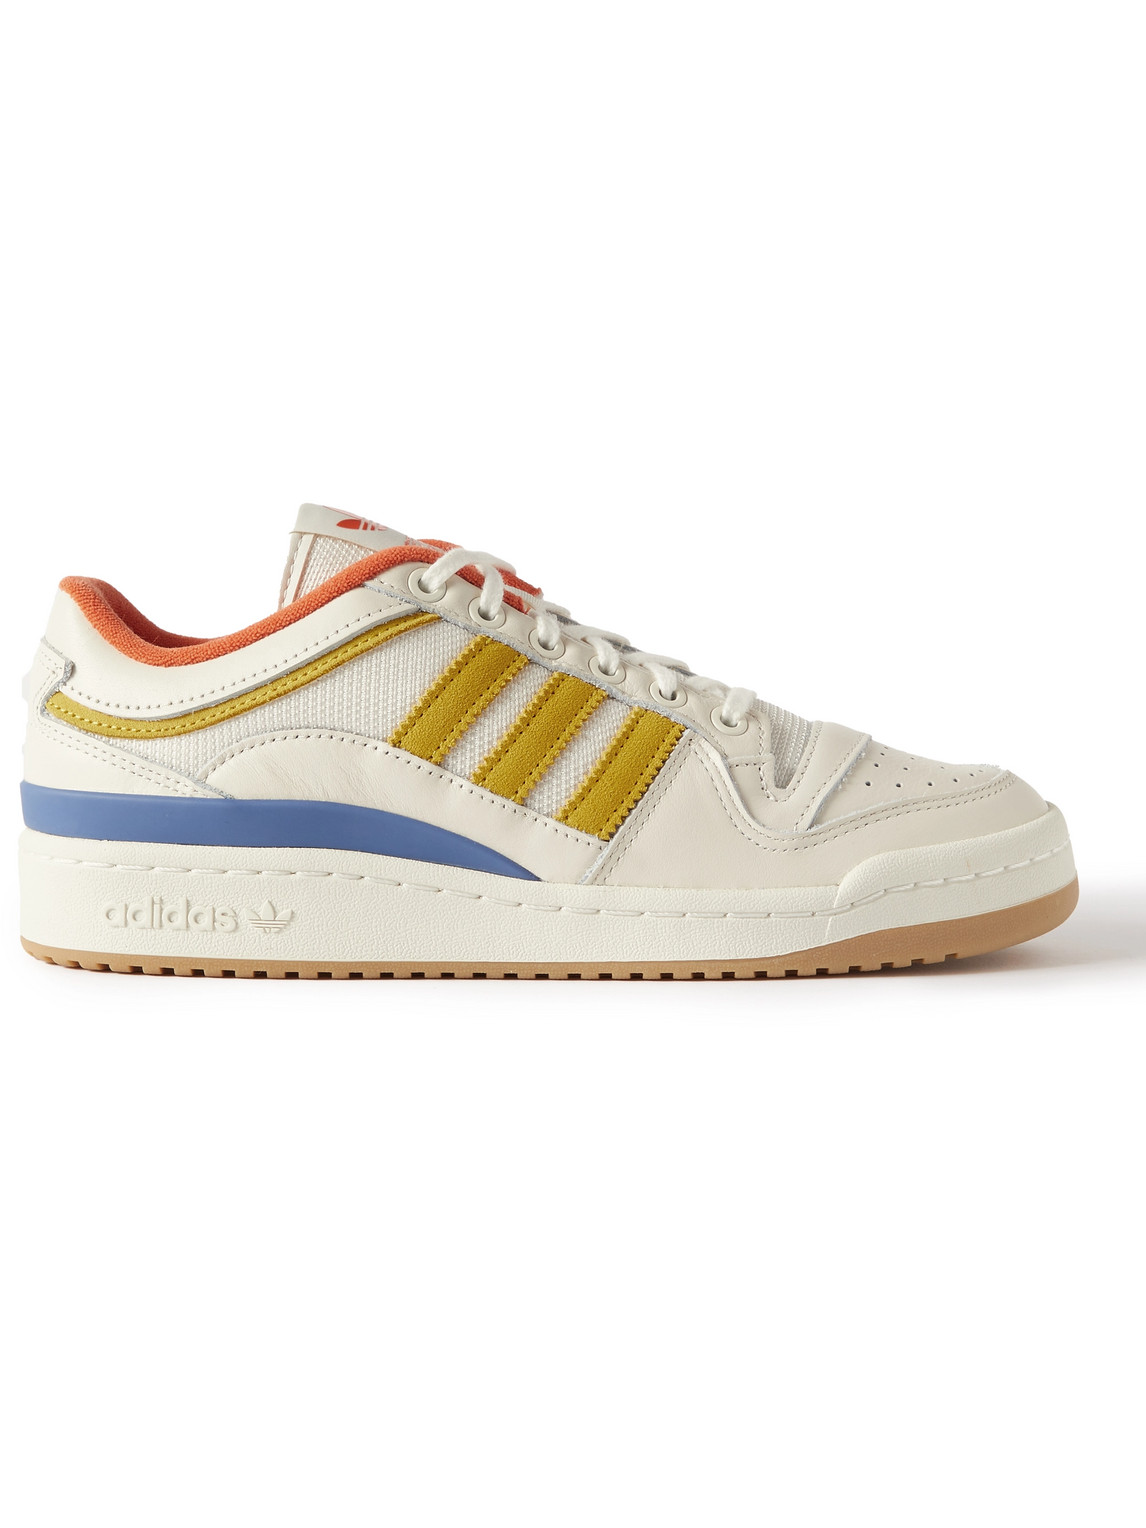 ADIDAS CONSORTIUM WOOD WOOD FORUM LOW LEATHER, MESH AND SUEDE SNEAKERS